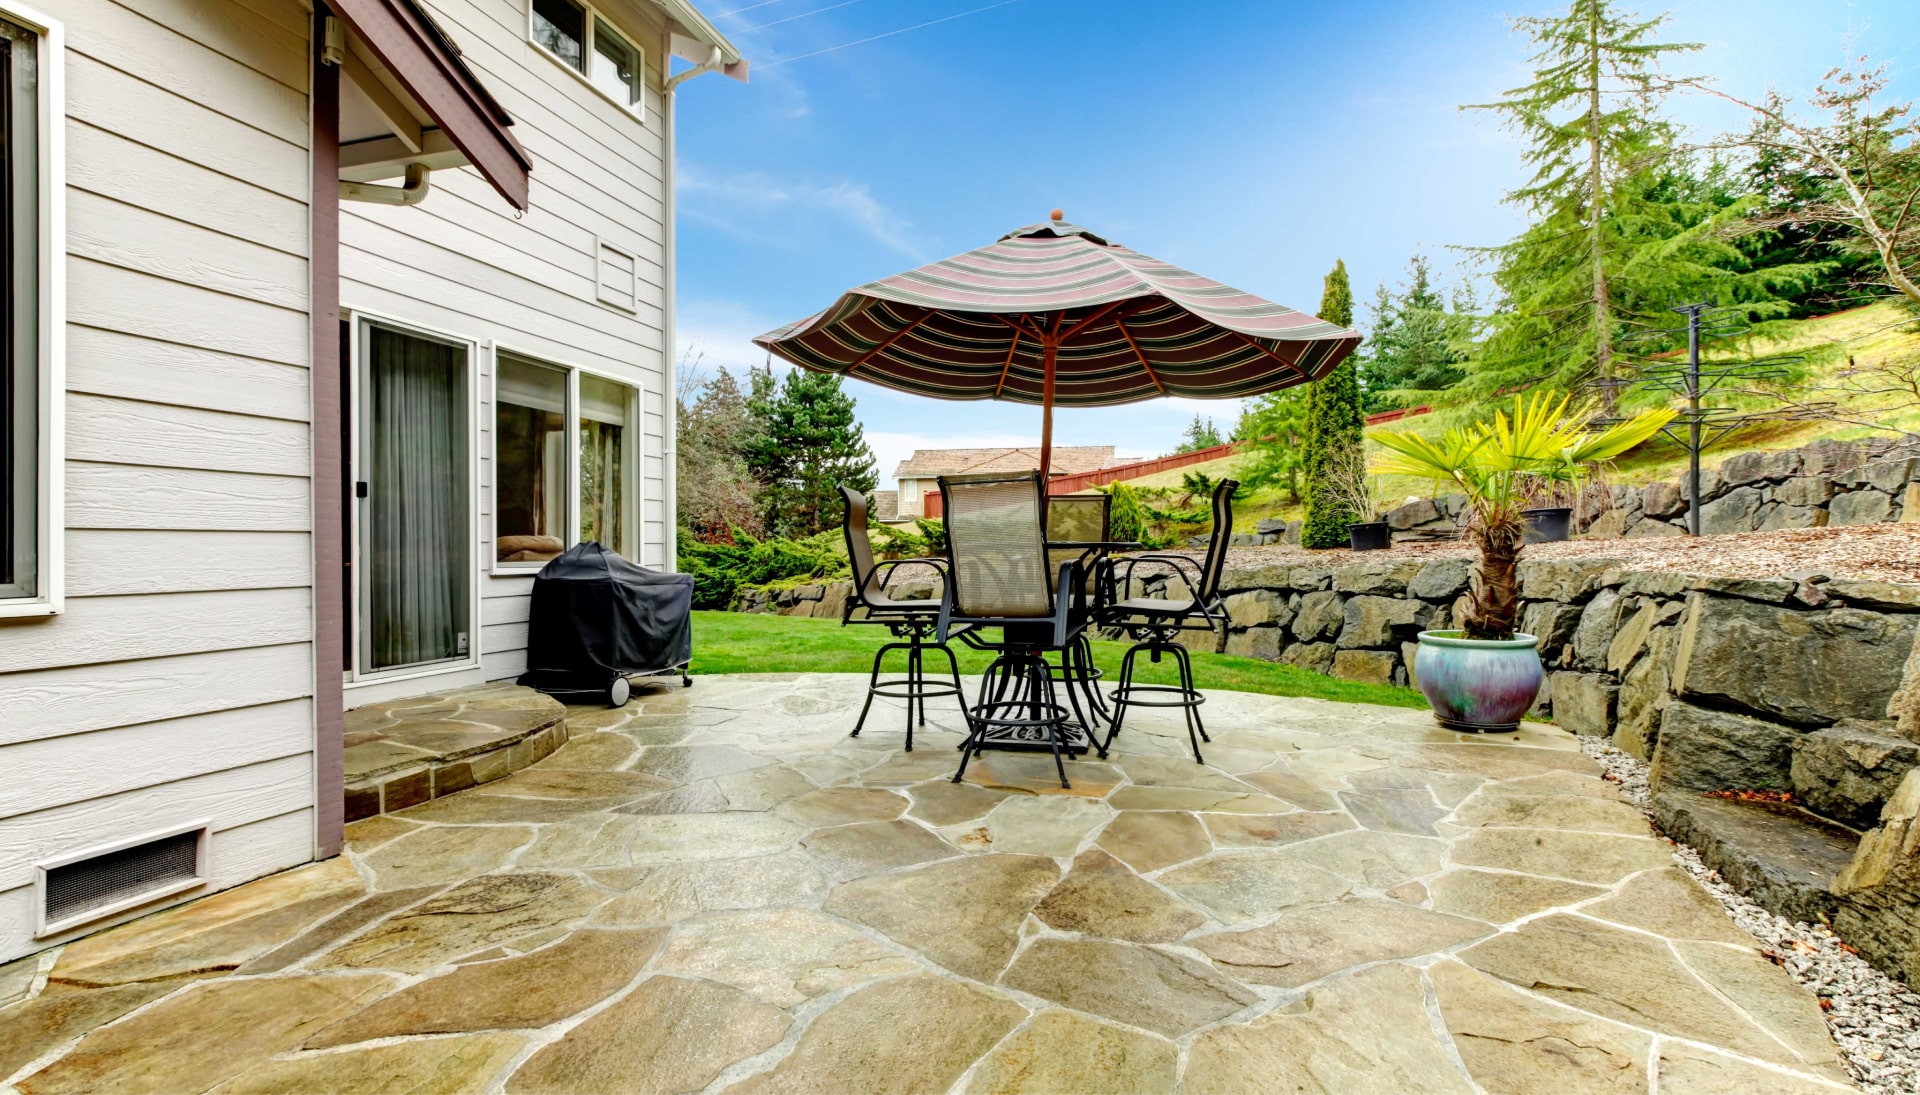 Beautifully Textured and Patterned Concrete Patios in Grand Junction, Colorado